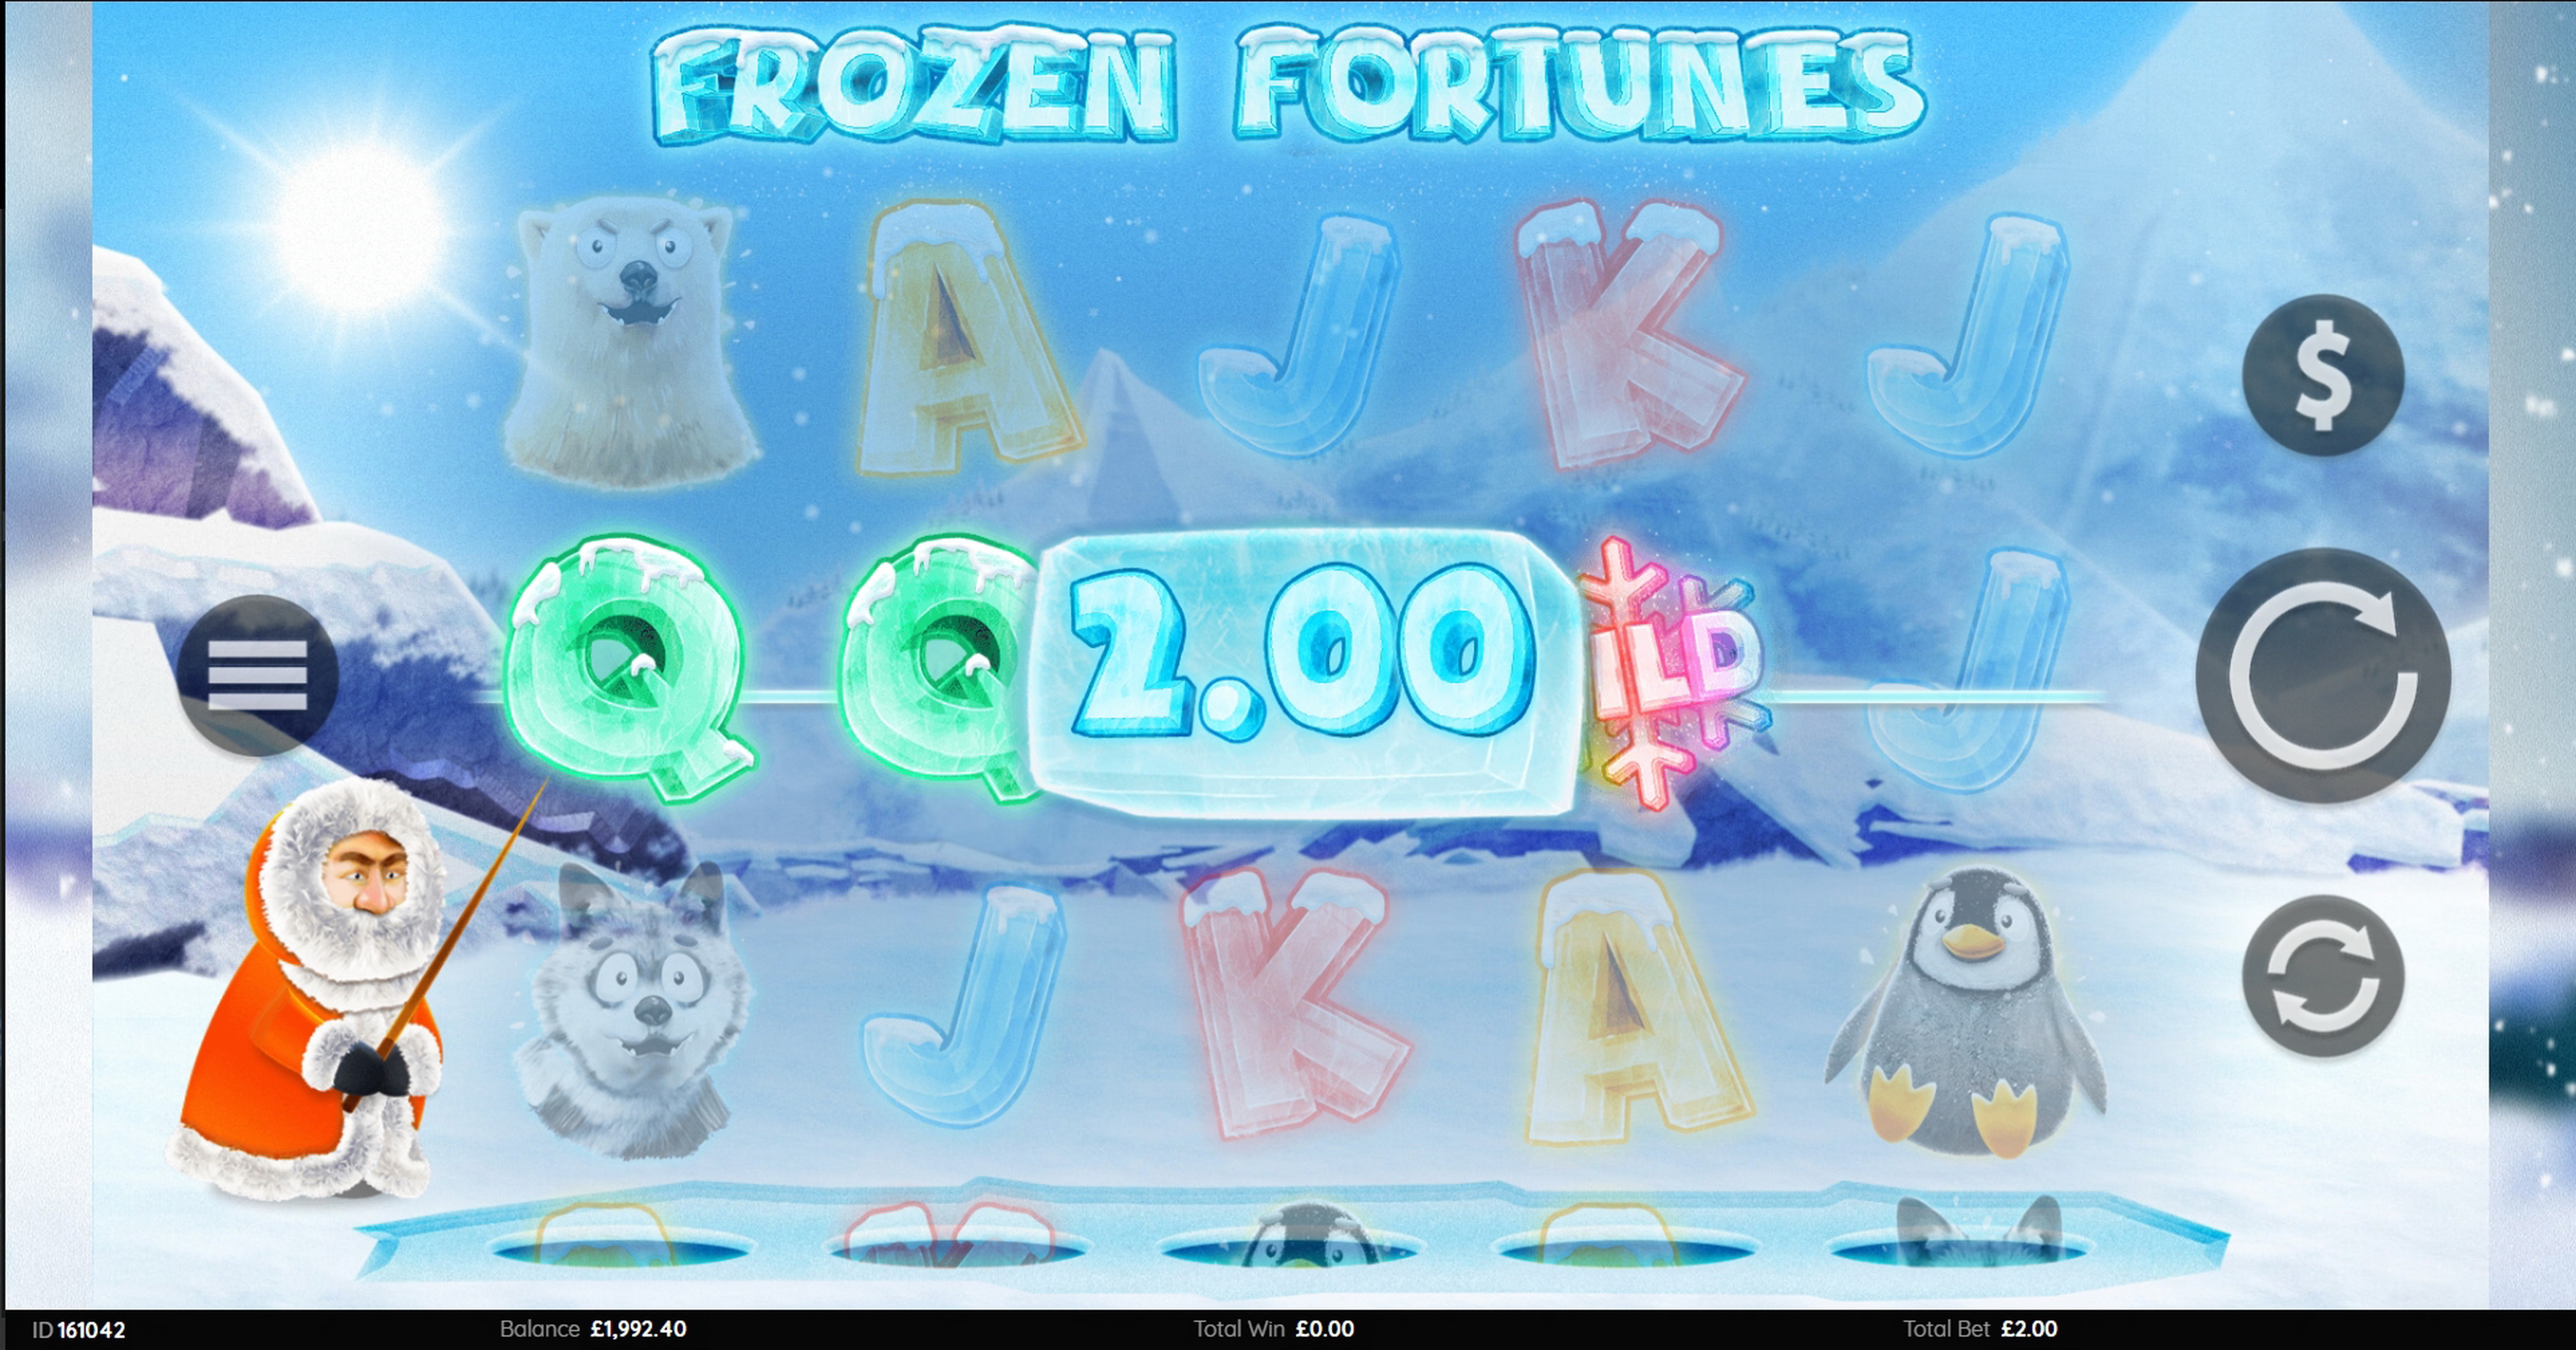 Win Money in Frozen Fortunes Free Slot Game by Endemol Games